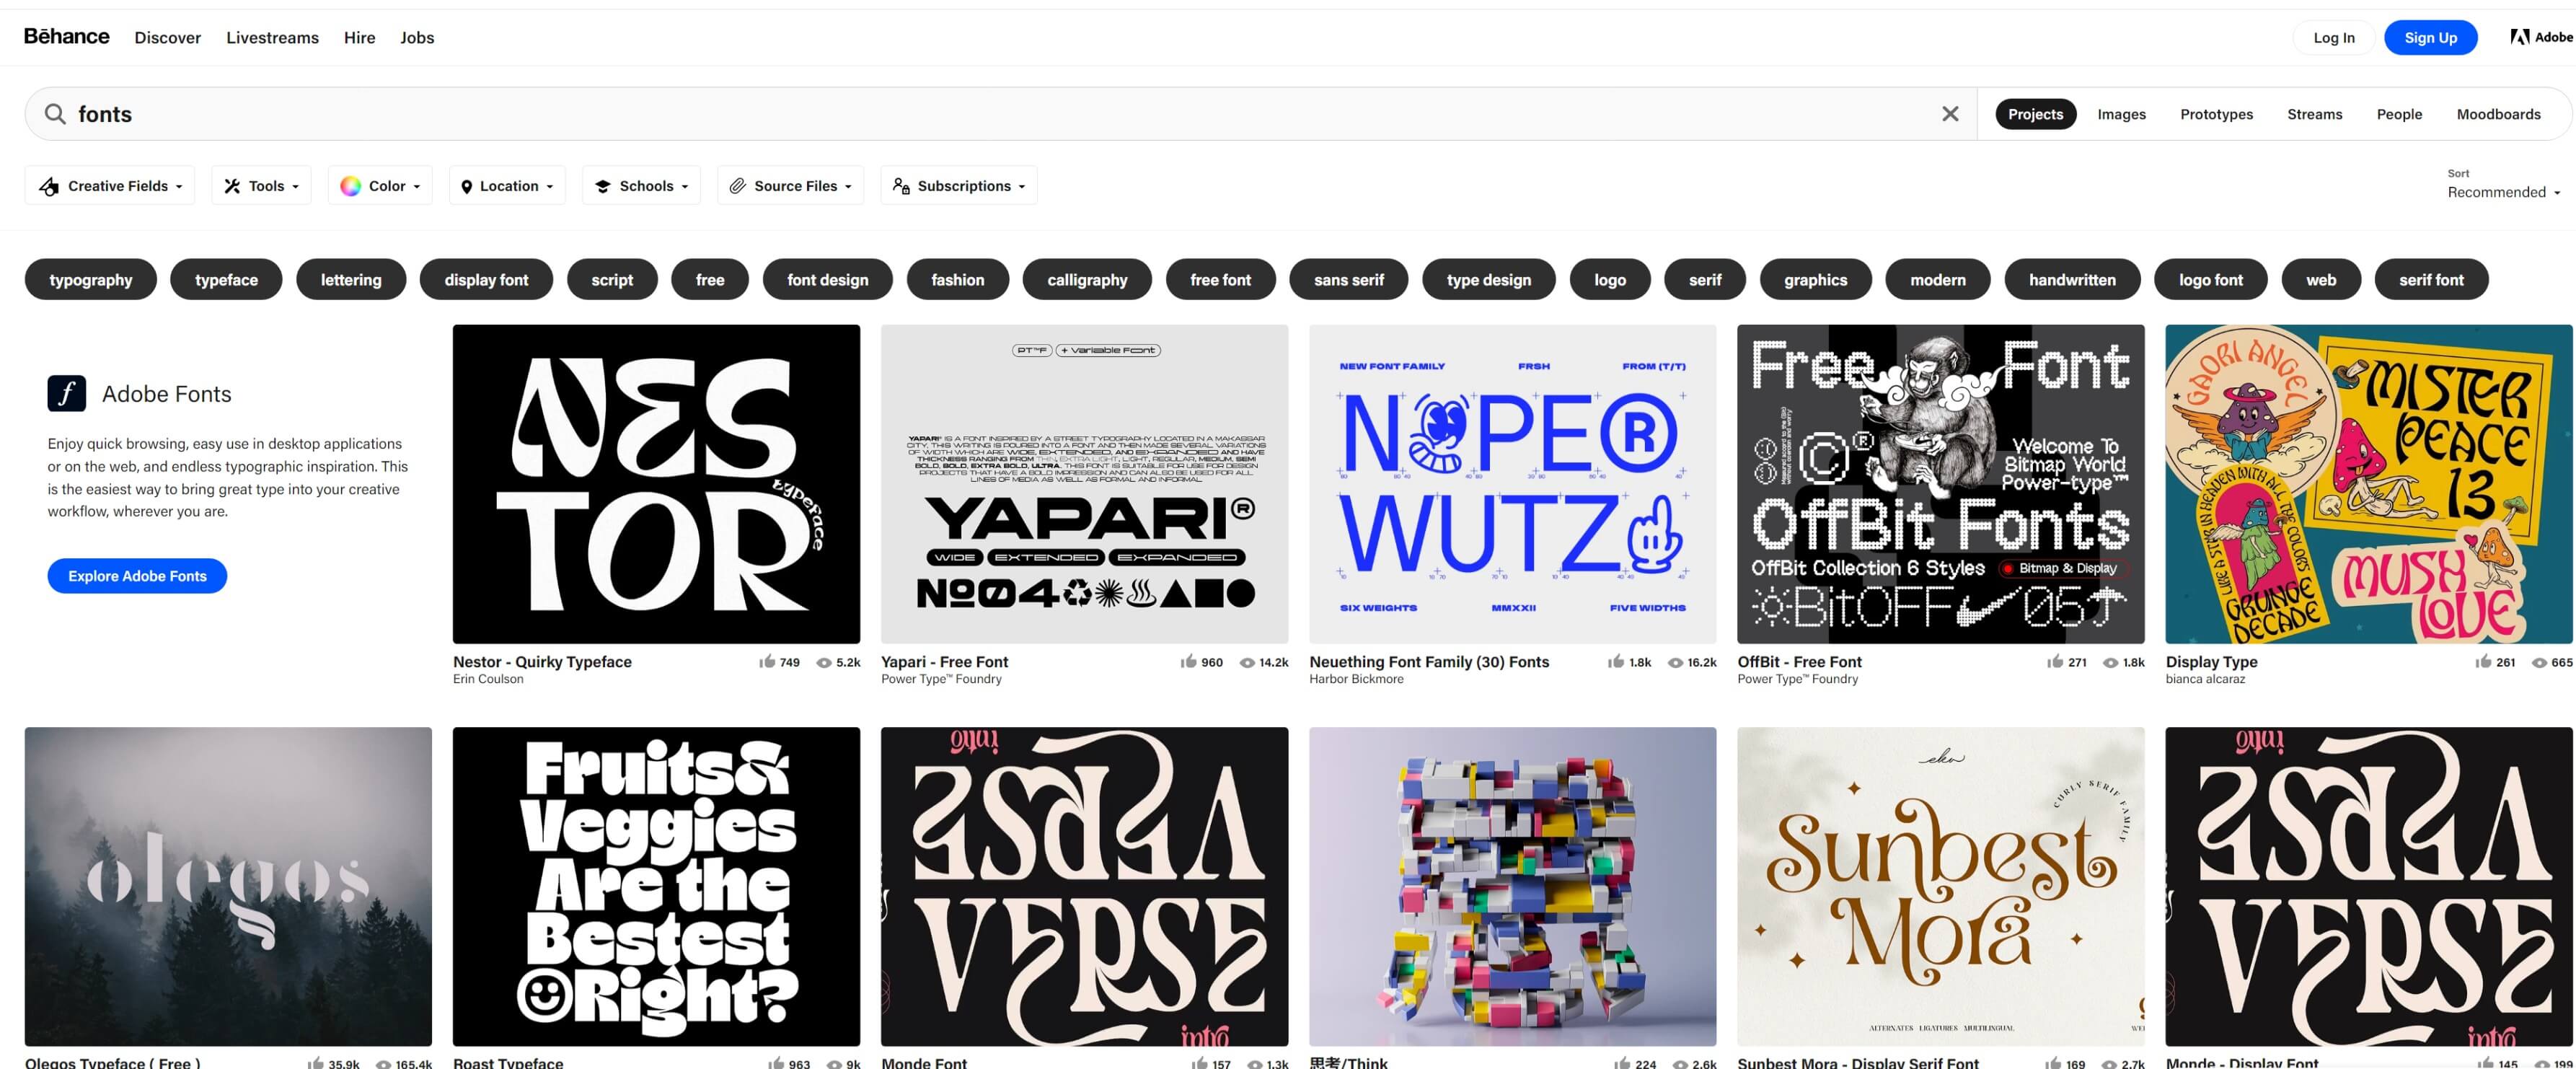 Behance For Free Fonts Online